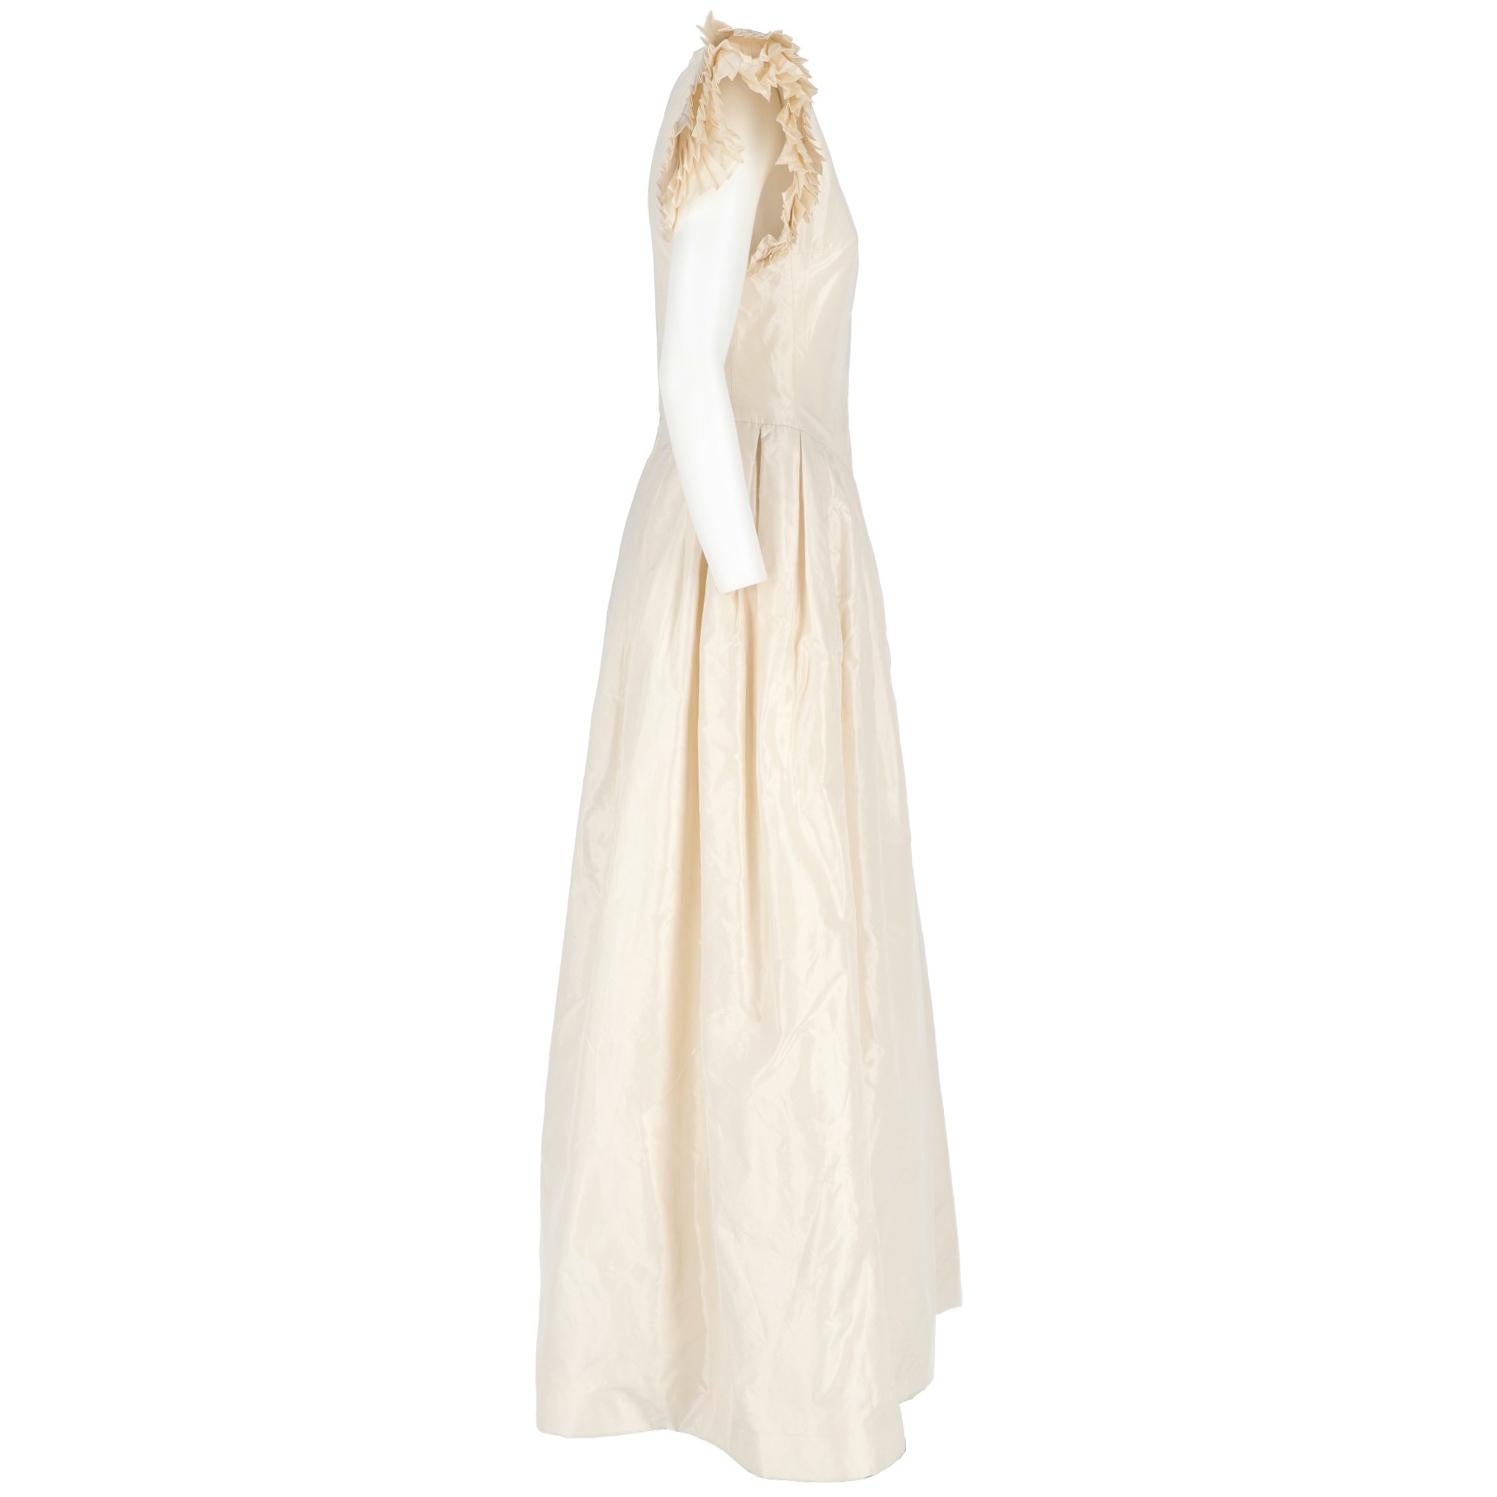 The romantic Nina Ricci Paris ivory silk long wedding dress features a long bell flared skirt with v-neck and pleated short-sleeves, shoulder paddings and back zip fastening.

Size: 44 IT
Made in France 
Linear measures

Height: 151 cm
Bust: 40